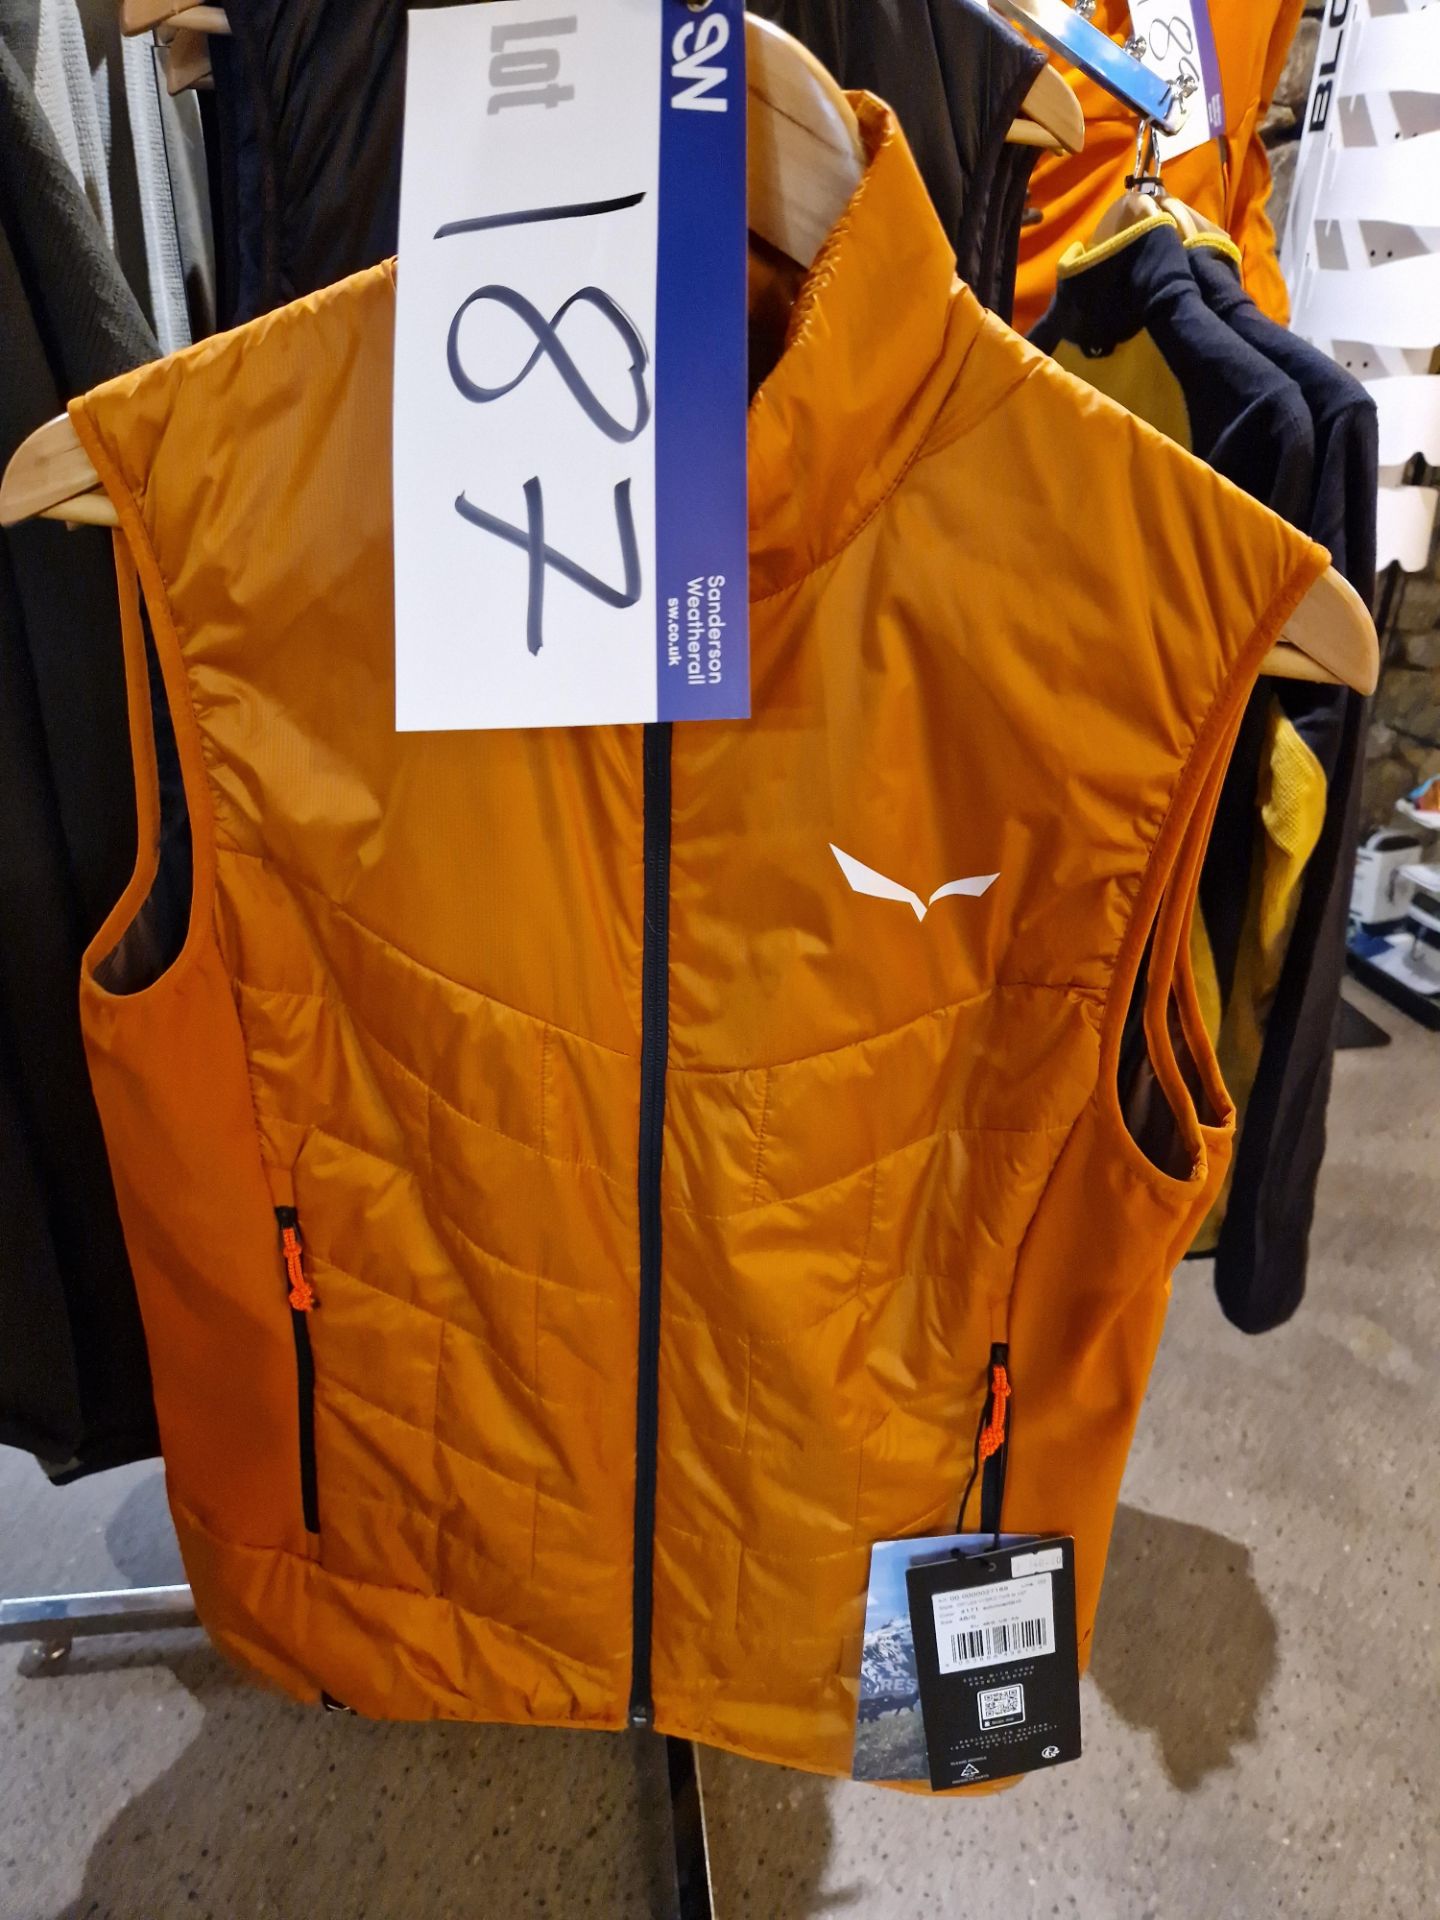 Two Salewa Ortles Hybrid TWR W Vests, Colour: Autumnal, Sizes: 46/S, 48/M Please read the